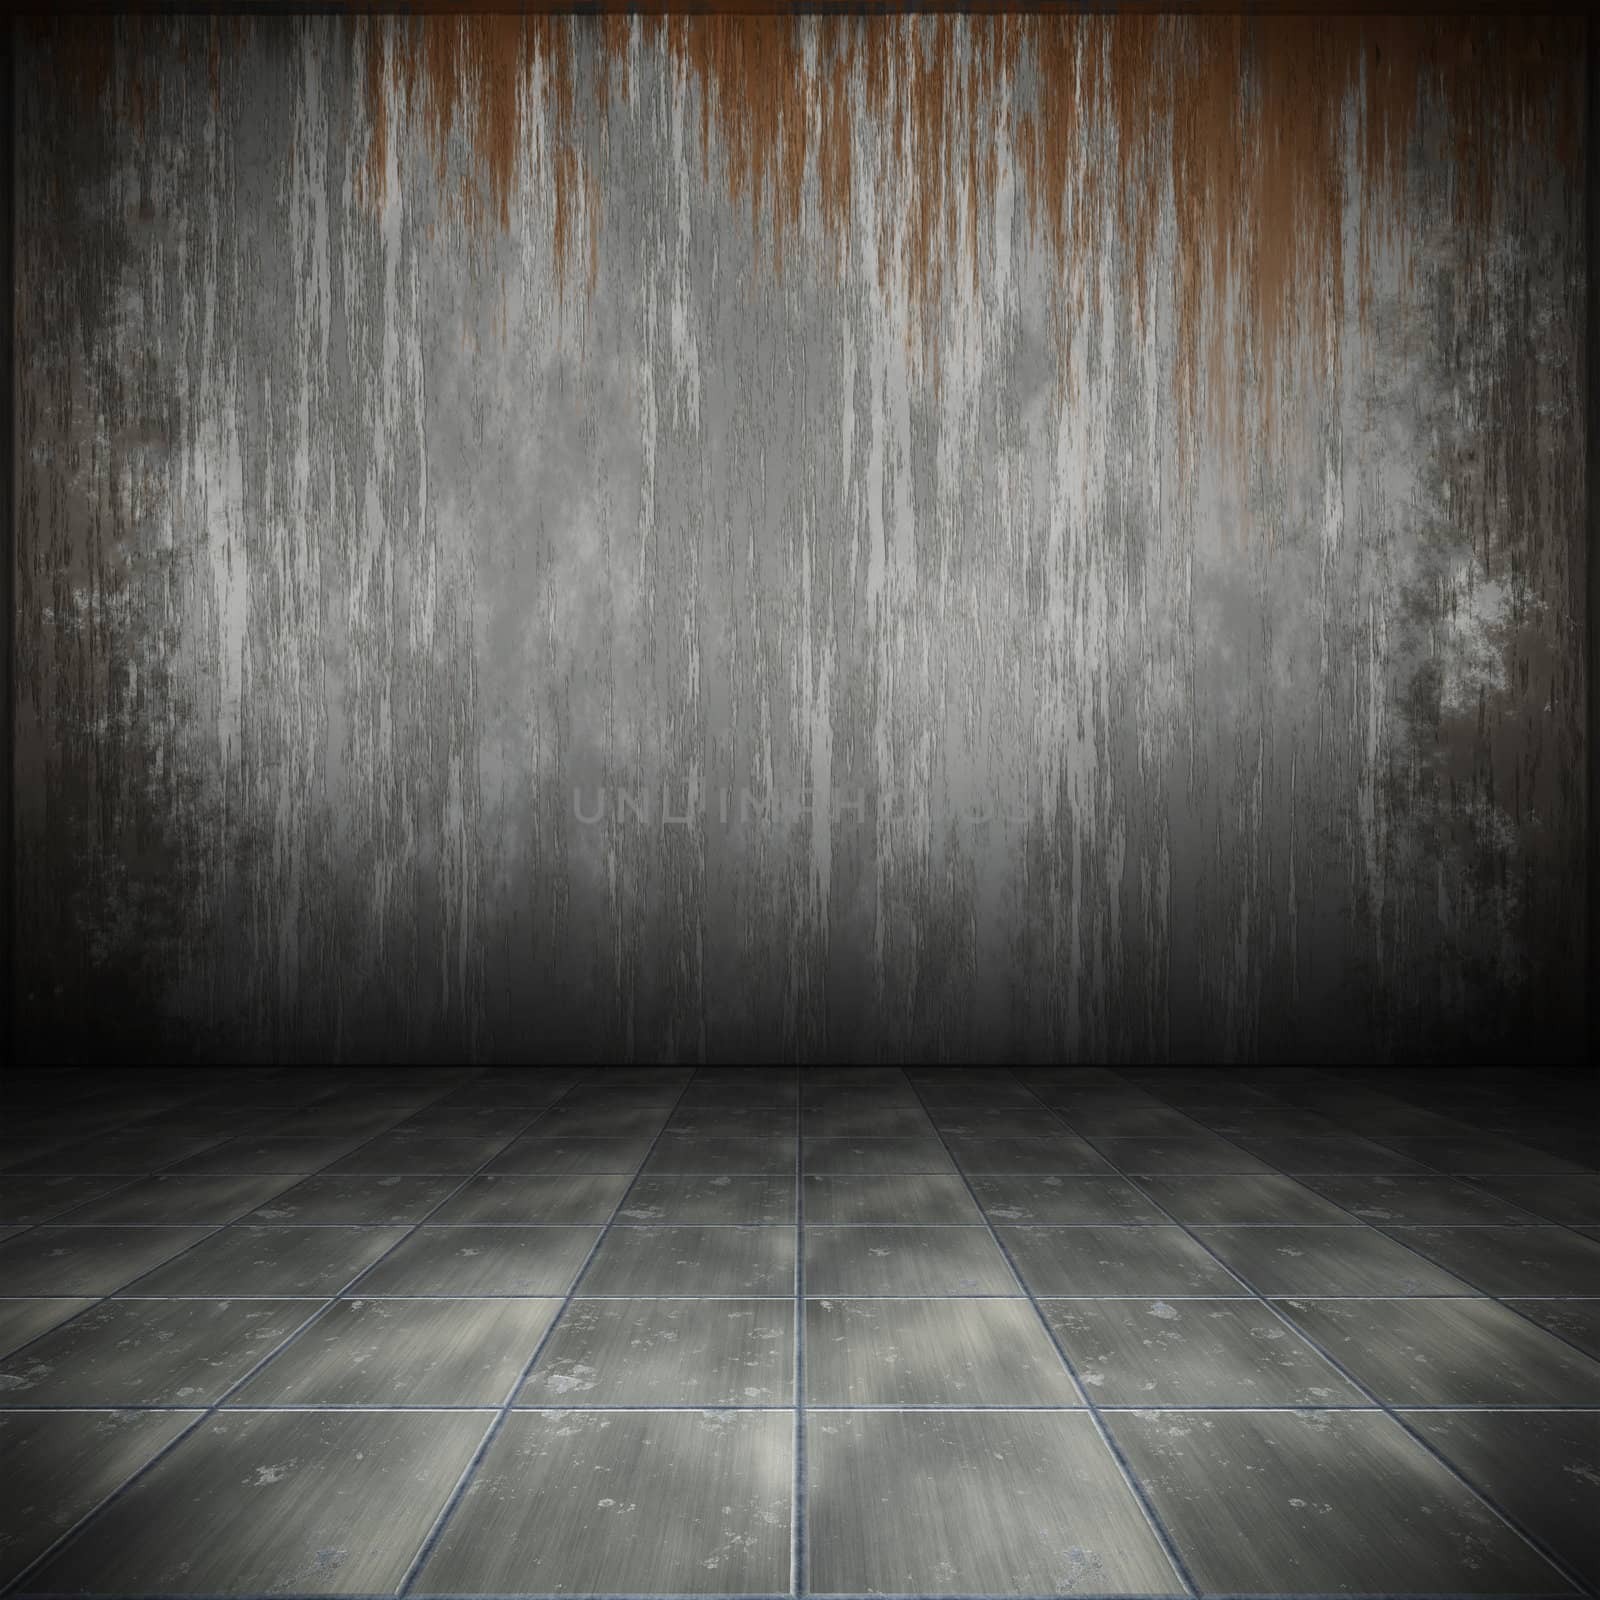 An image of a nice steel floor for your content